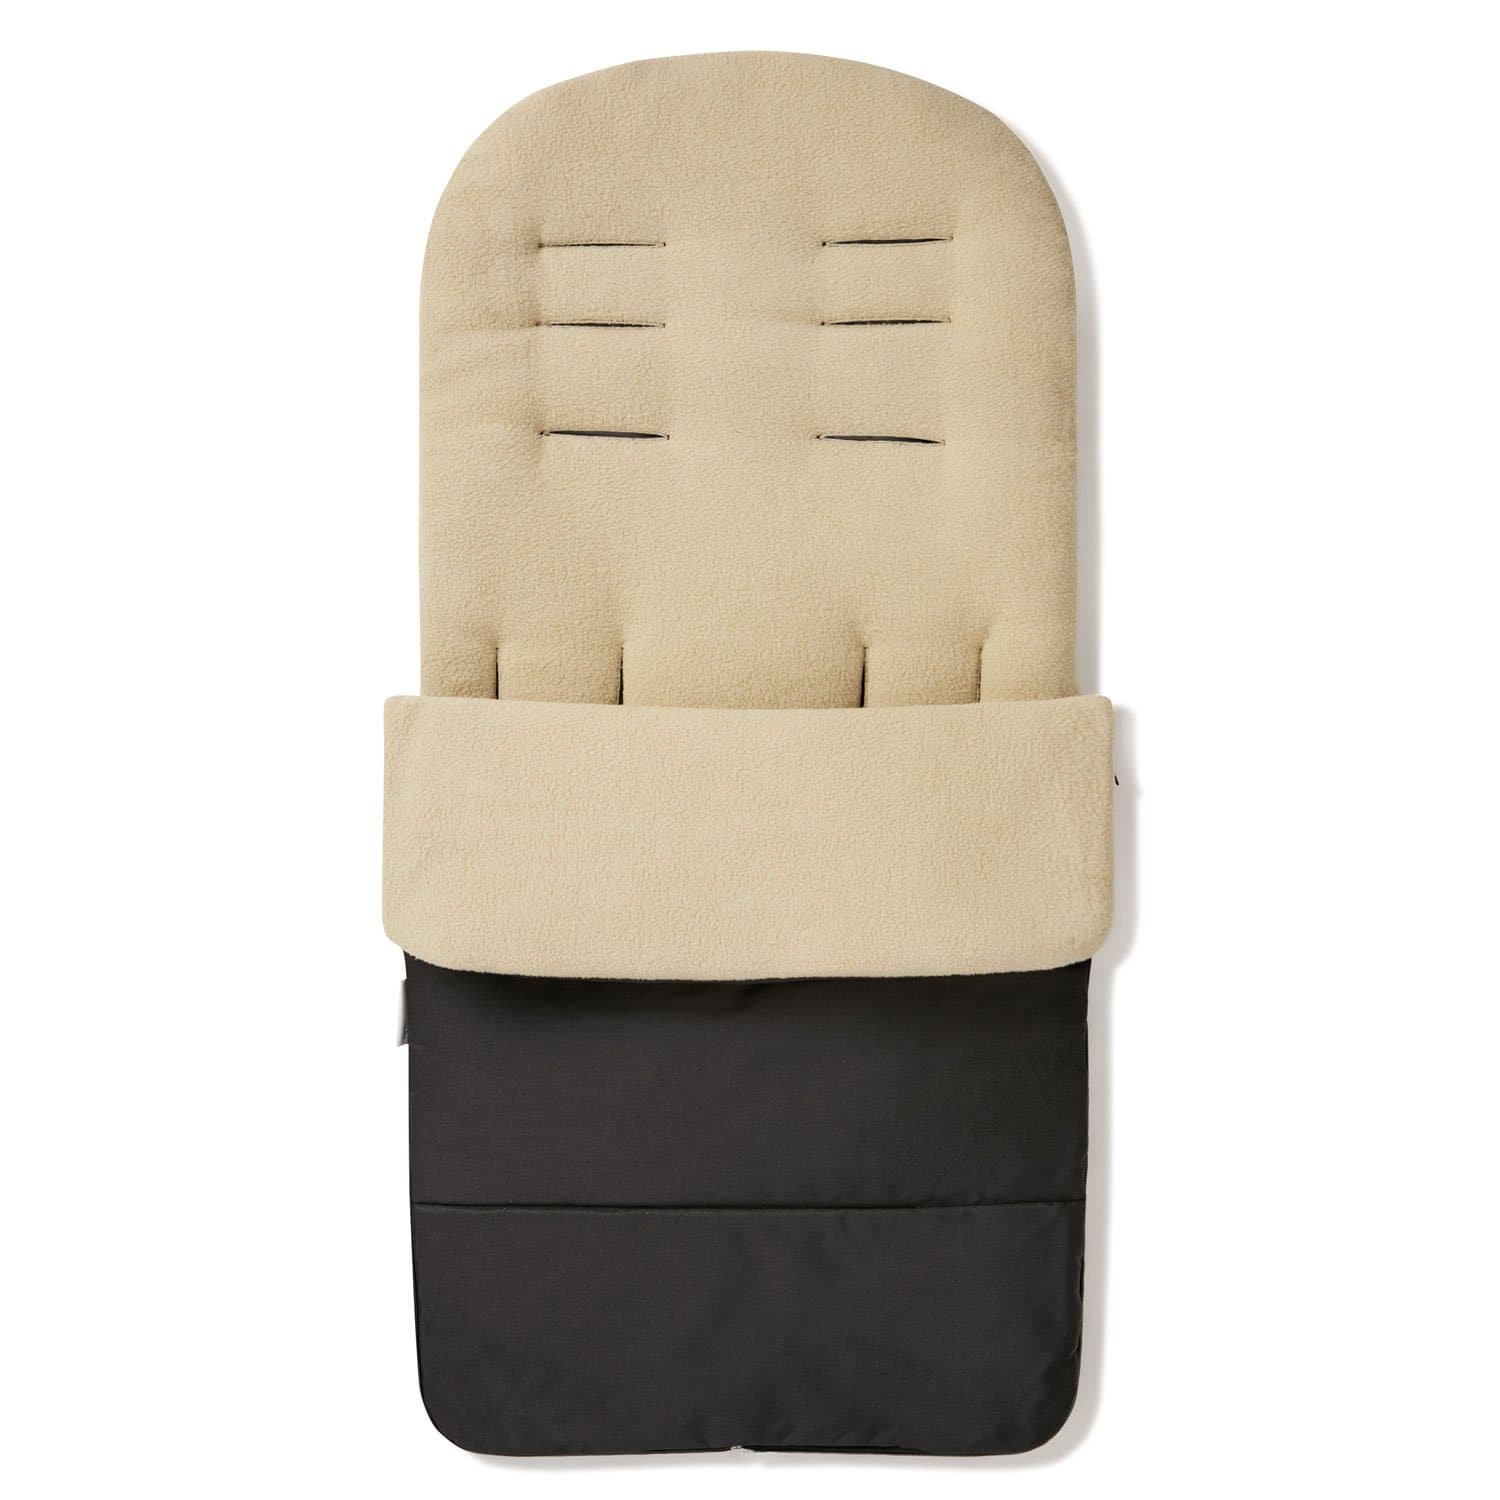 Premium Footmuff / Cosy Toes Compatible with Noukies - Desert Sand / Fits All Models | For Your Little One